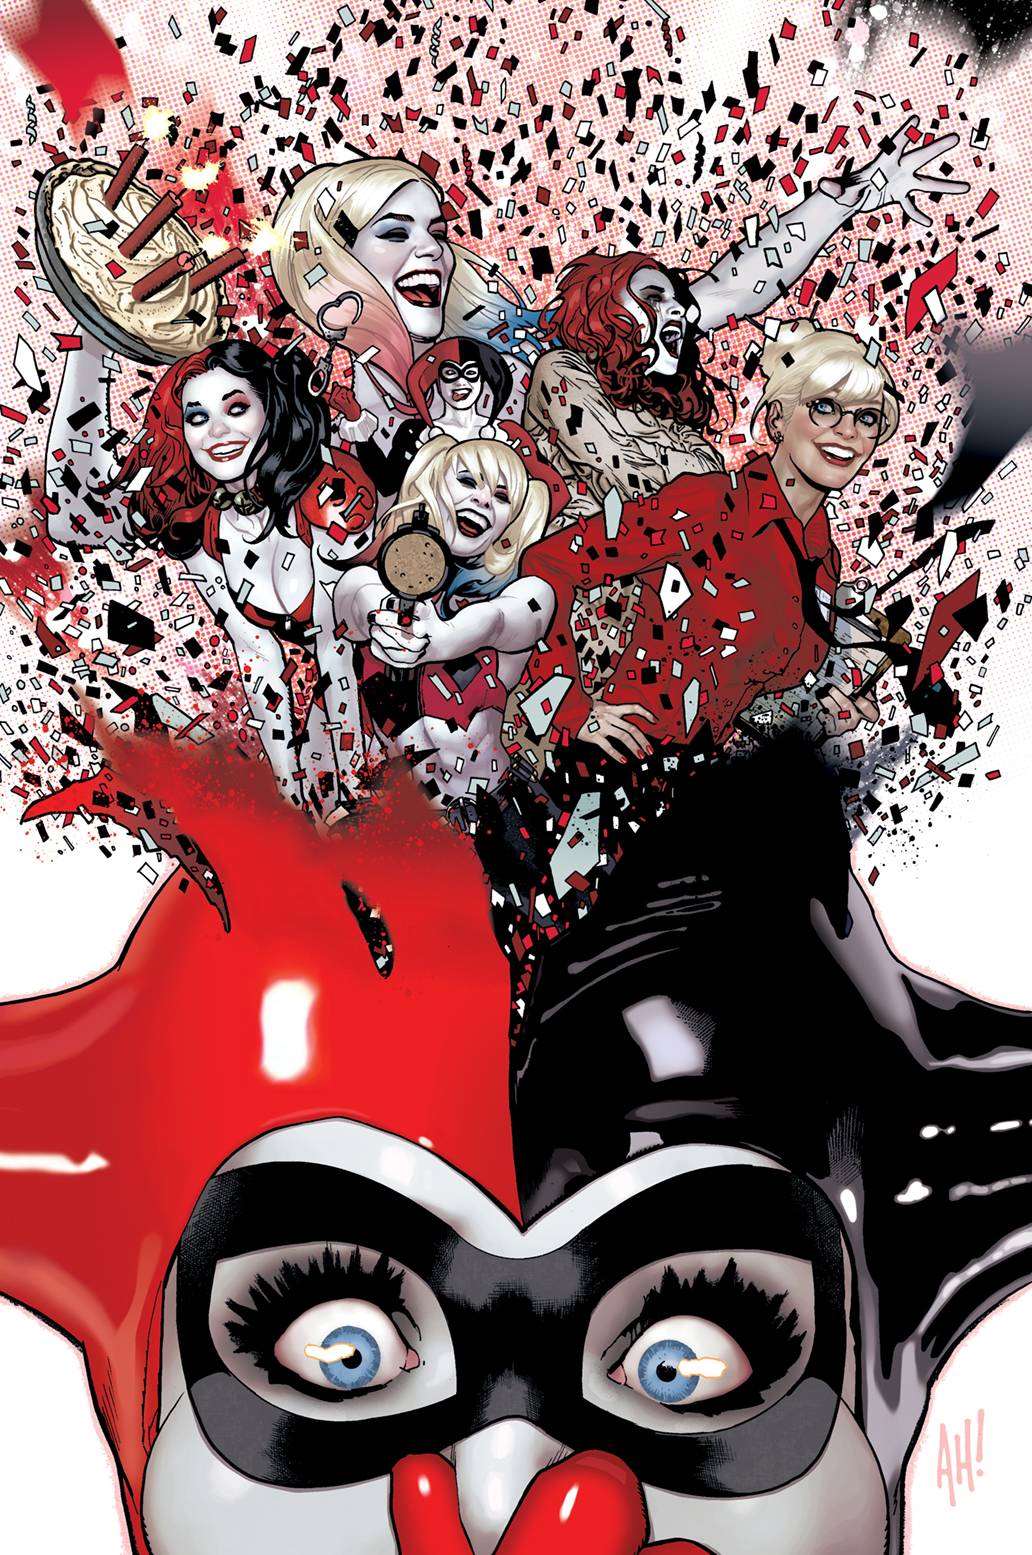 HARLEY QUINN 30TH ANNIVERSARY SPECIAL #1 - The Comic Construct